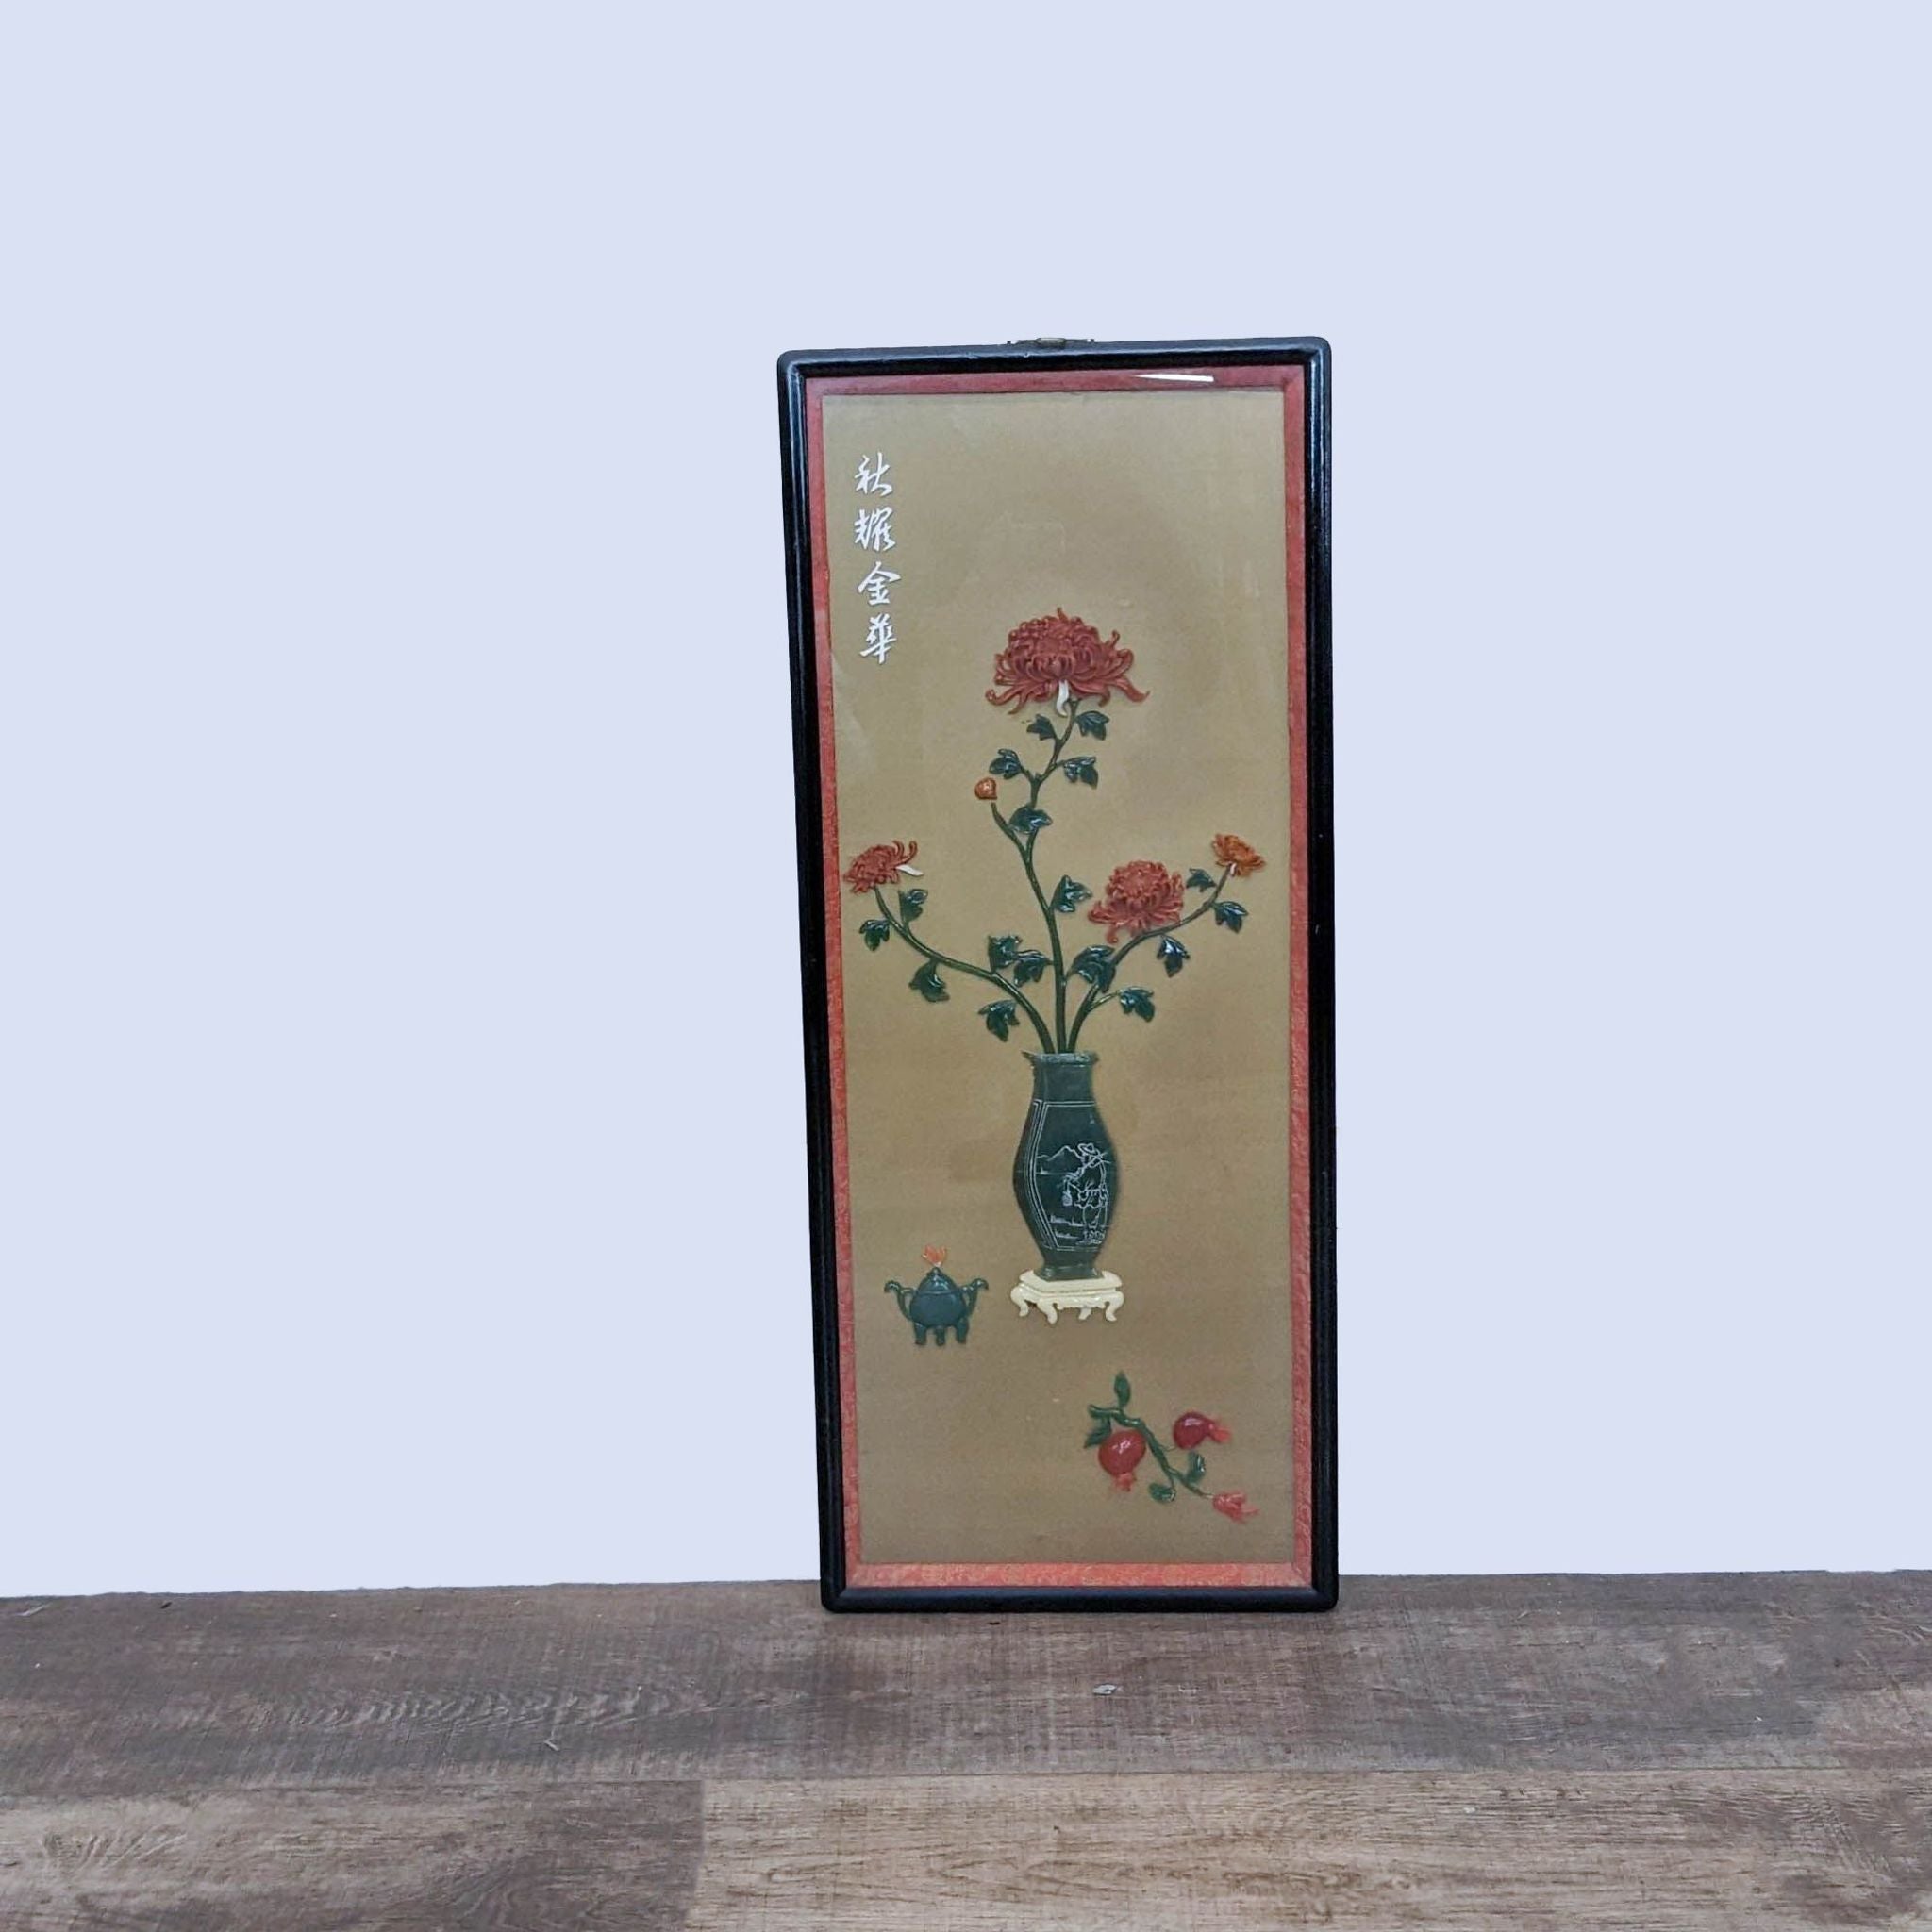 Image 1: Framed collage art of a floral vase with jadeite, colored stones, and Chinese characters, symbolizing summer by Reperch.